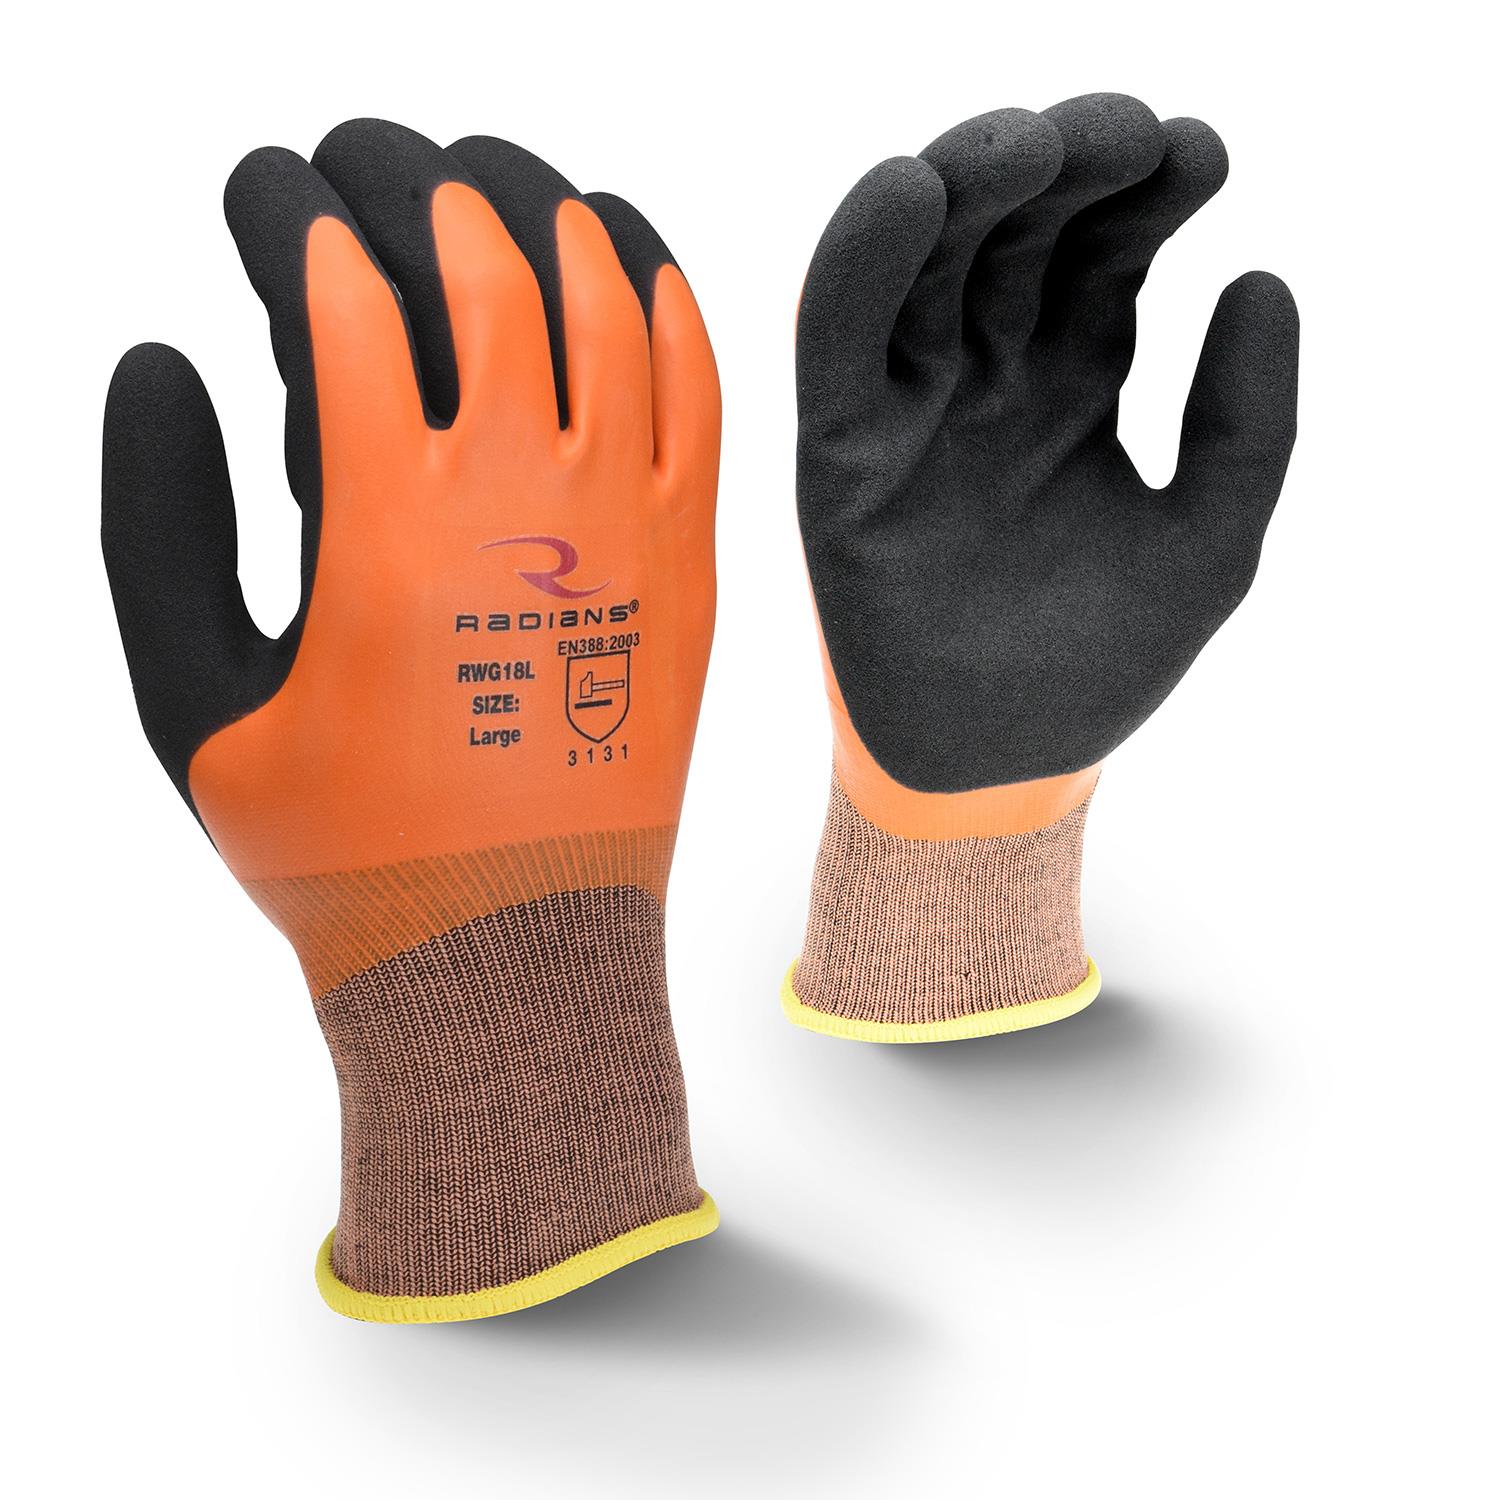 RADIANS RWG18 LATEX COATED WORK GLOVE - Lysol Disinfectant Spray